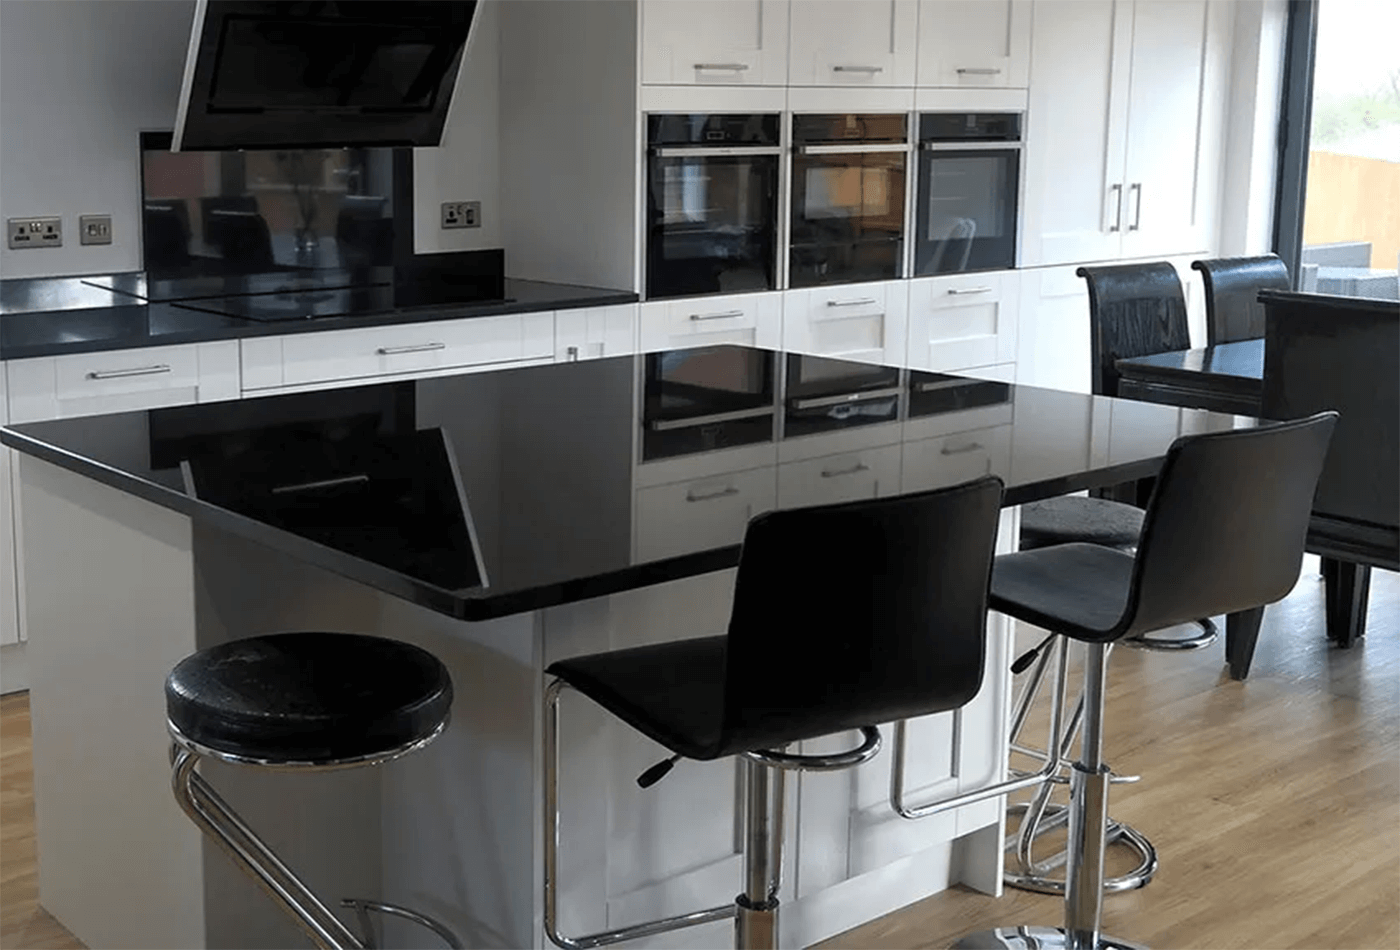 Absolute Black Granite; Perfect Black Stone For Your Kitchen